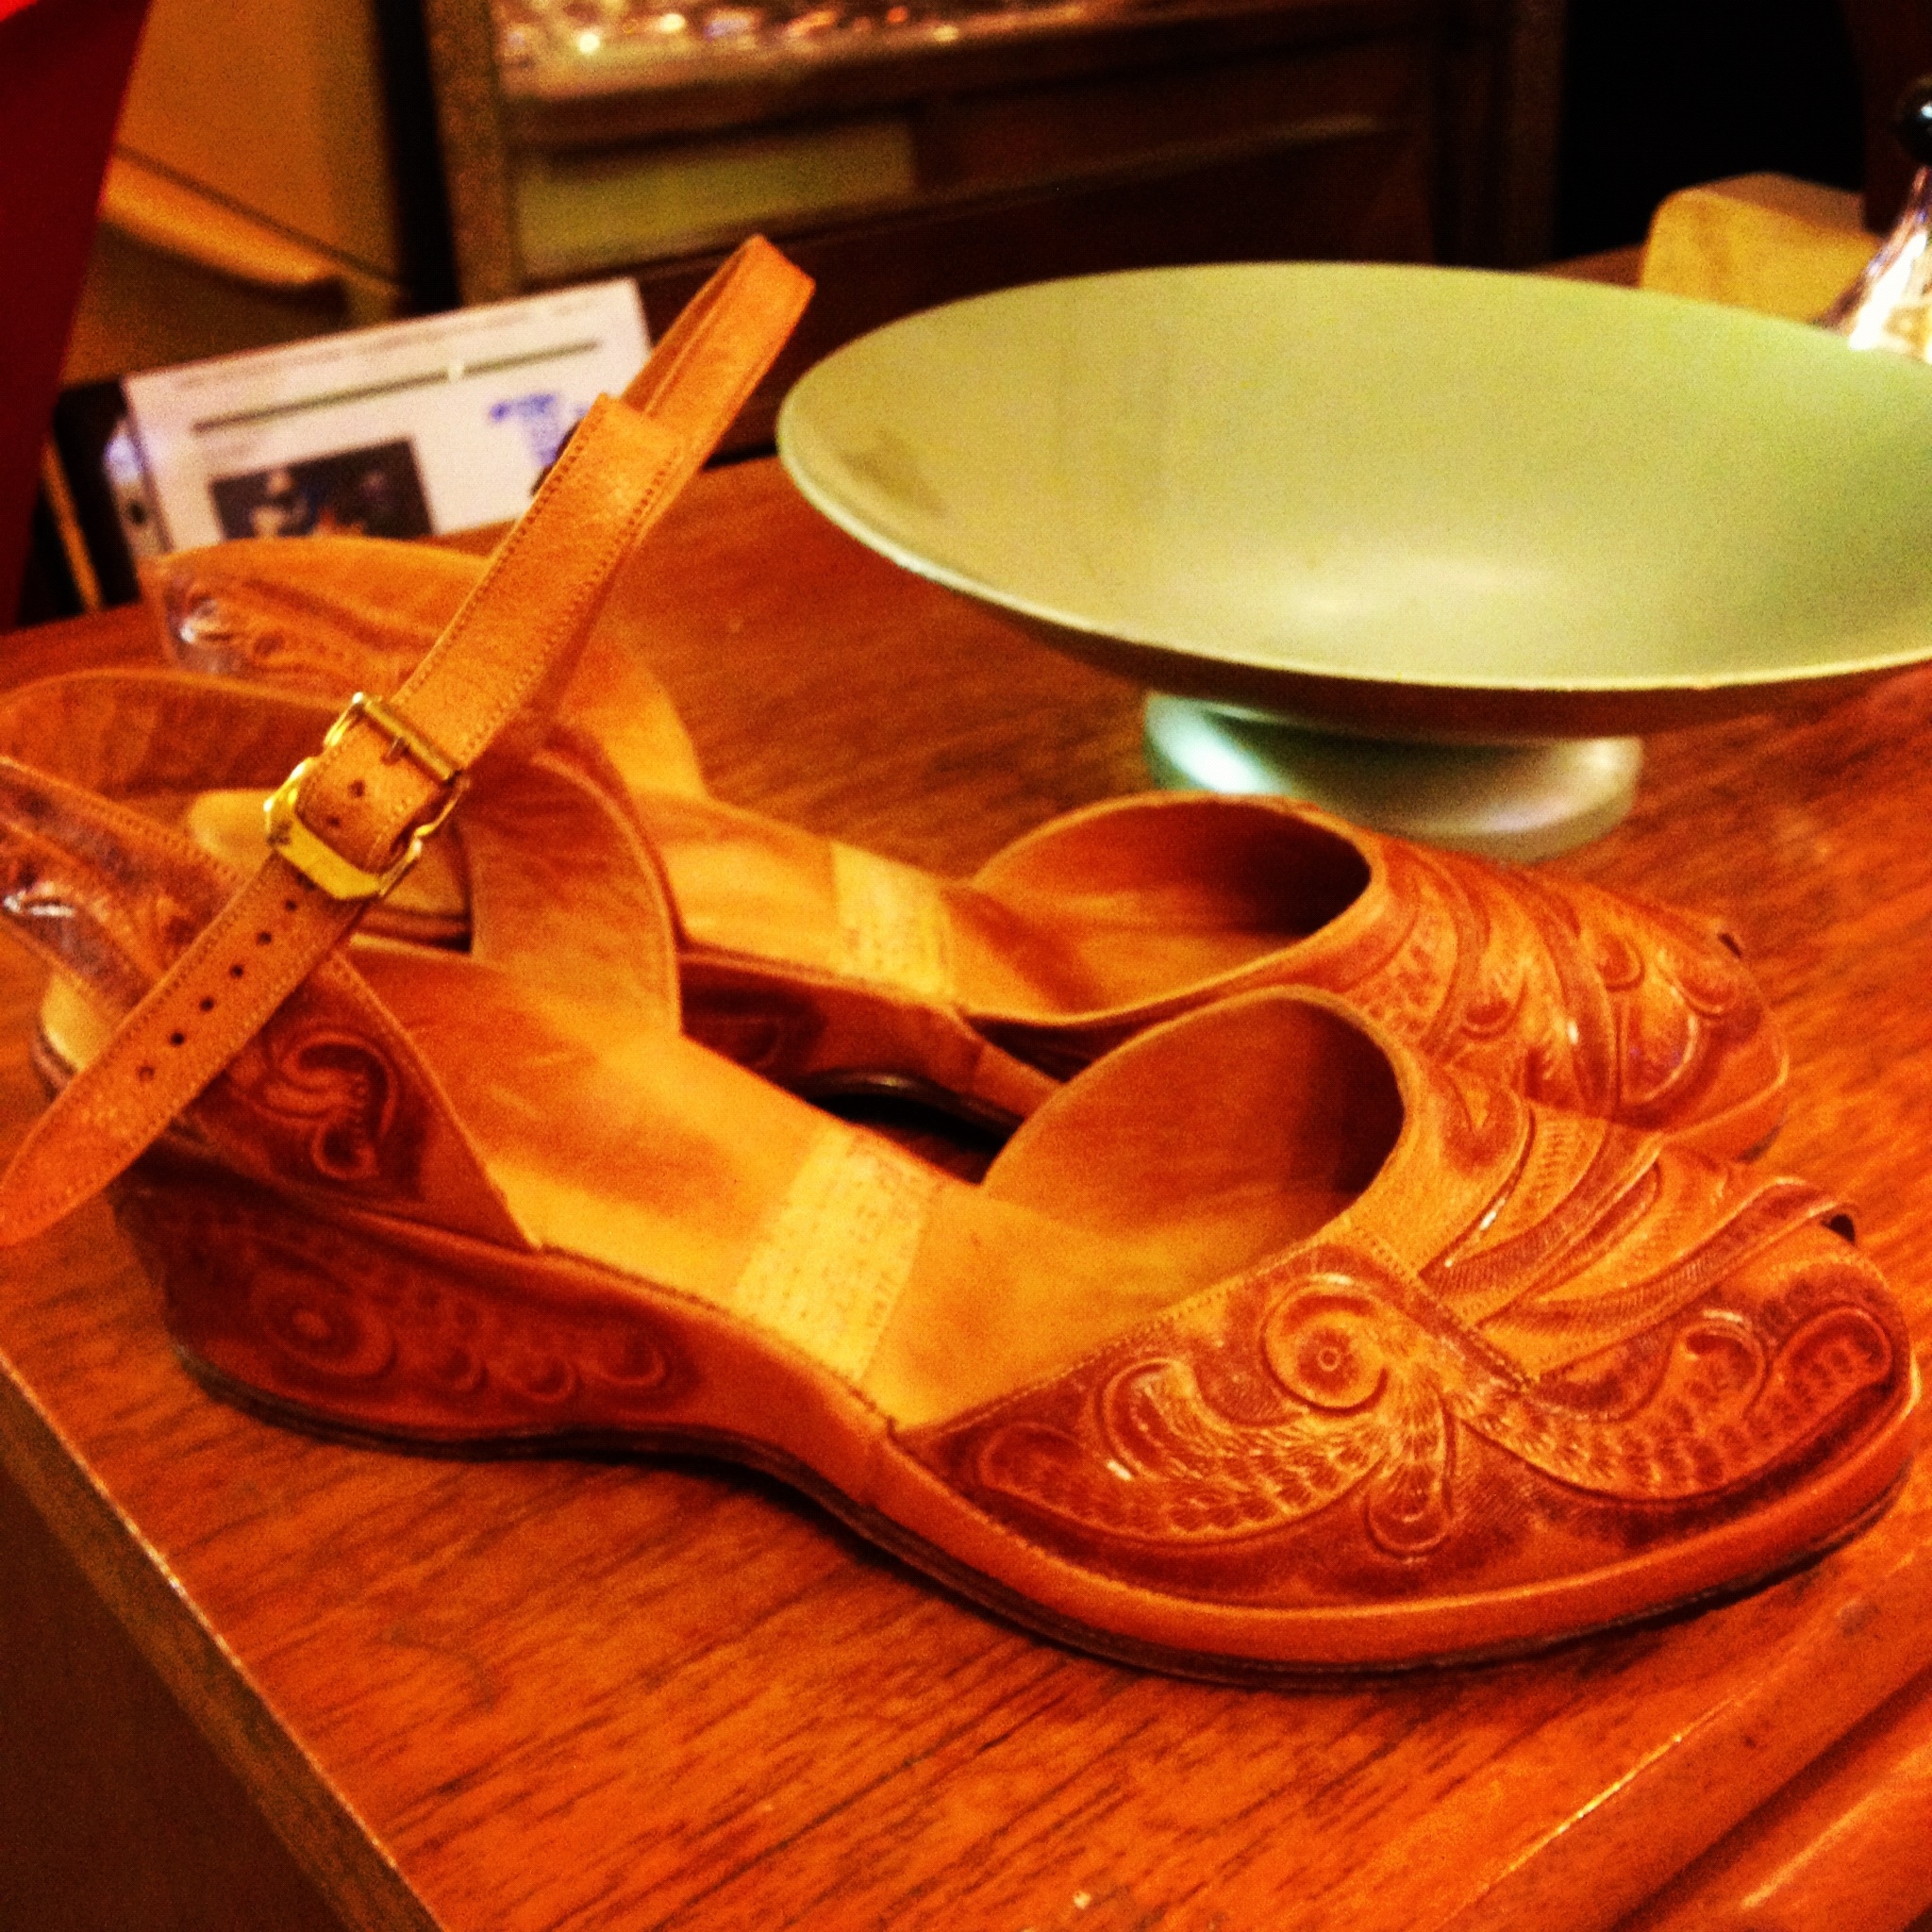 mexican tooled leather sandals